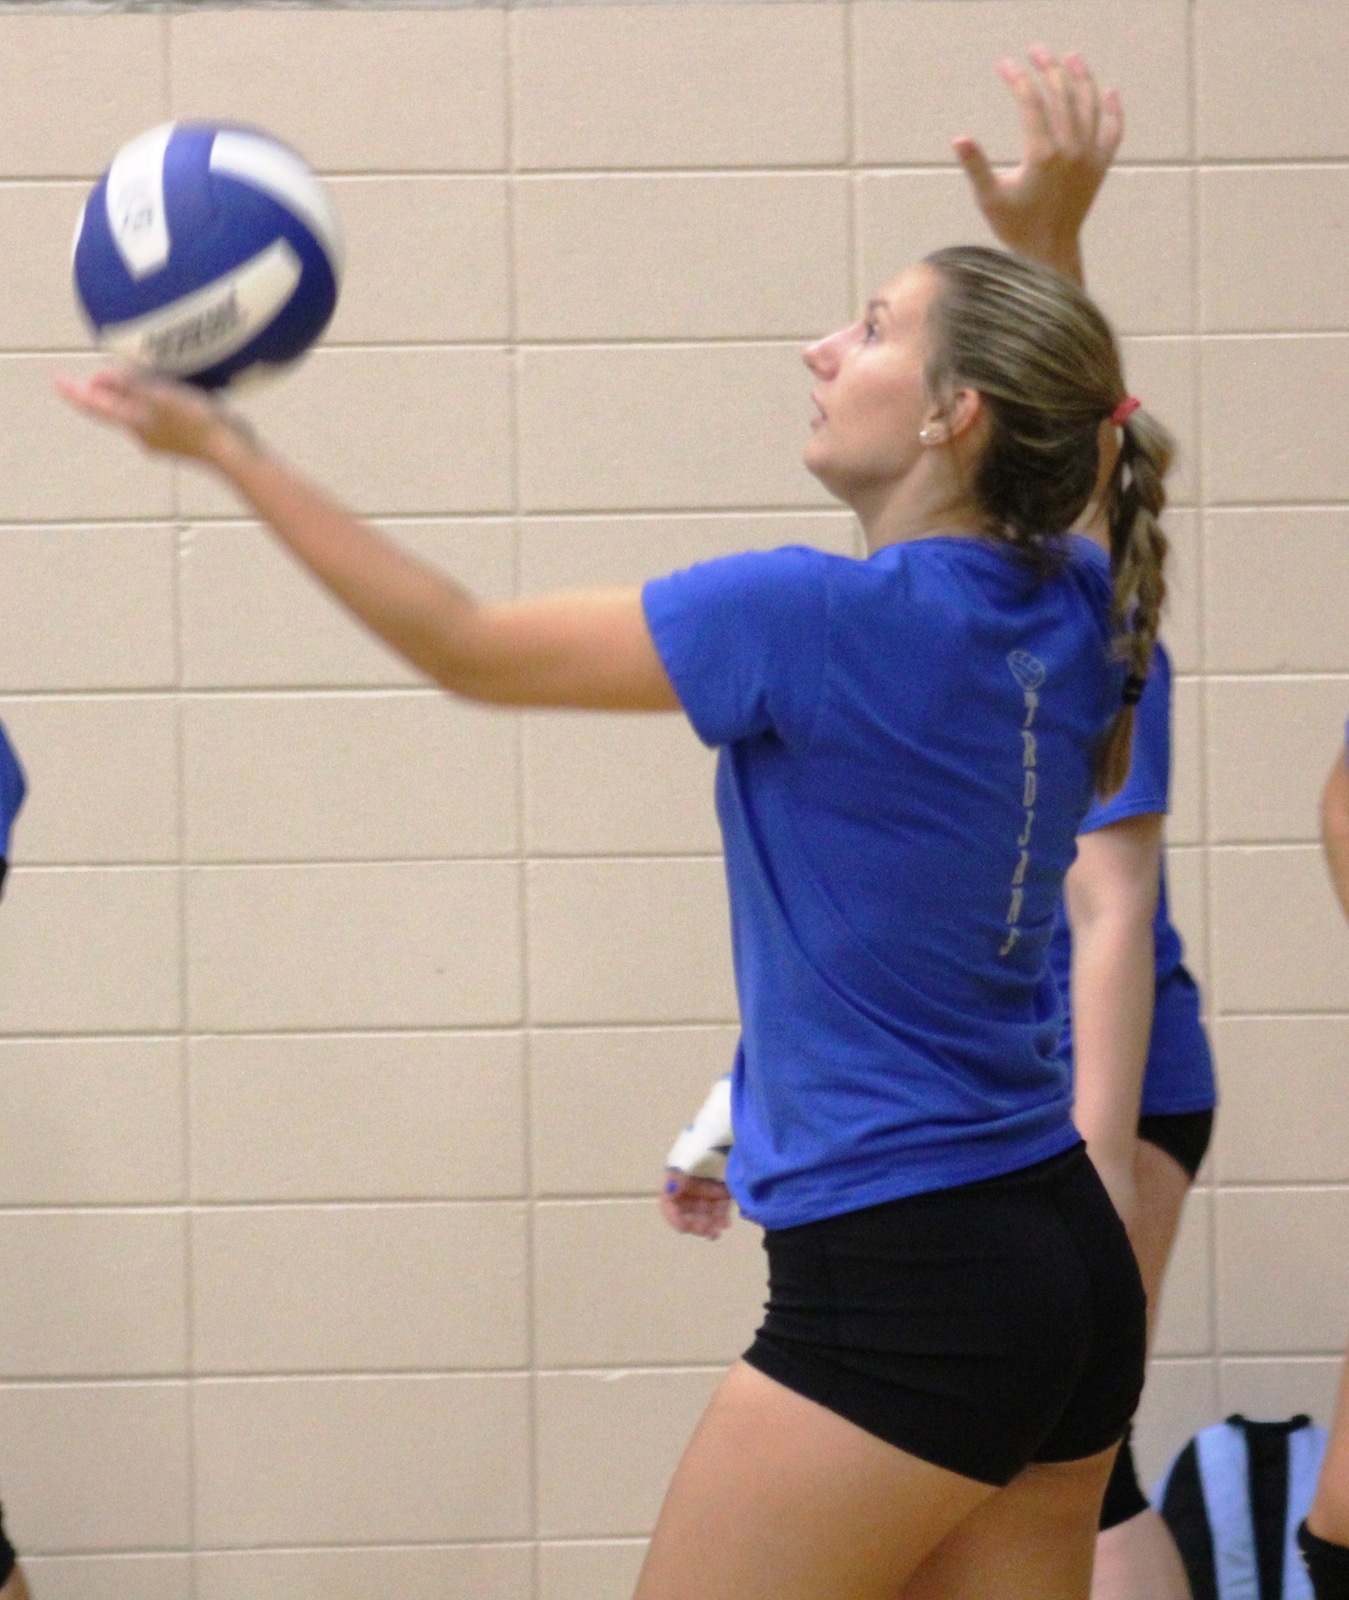 NIACC freshman Sydney Roush serves in a scrimmage on Aug. 17 in the NIACC gym.